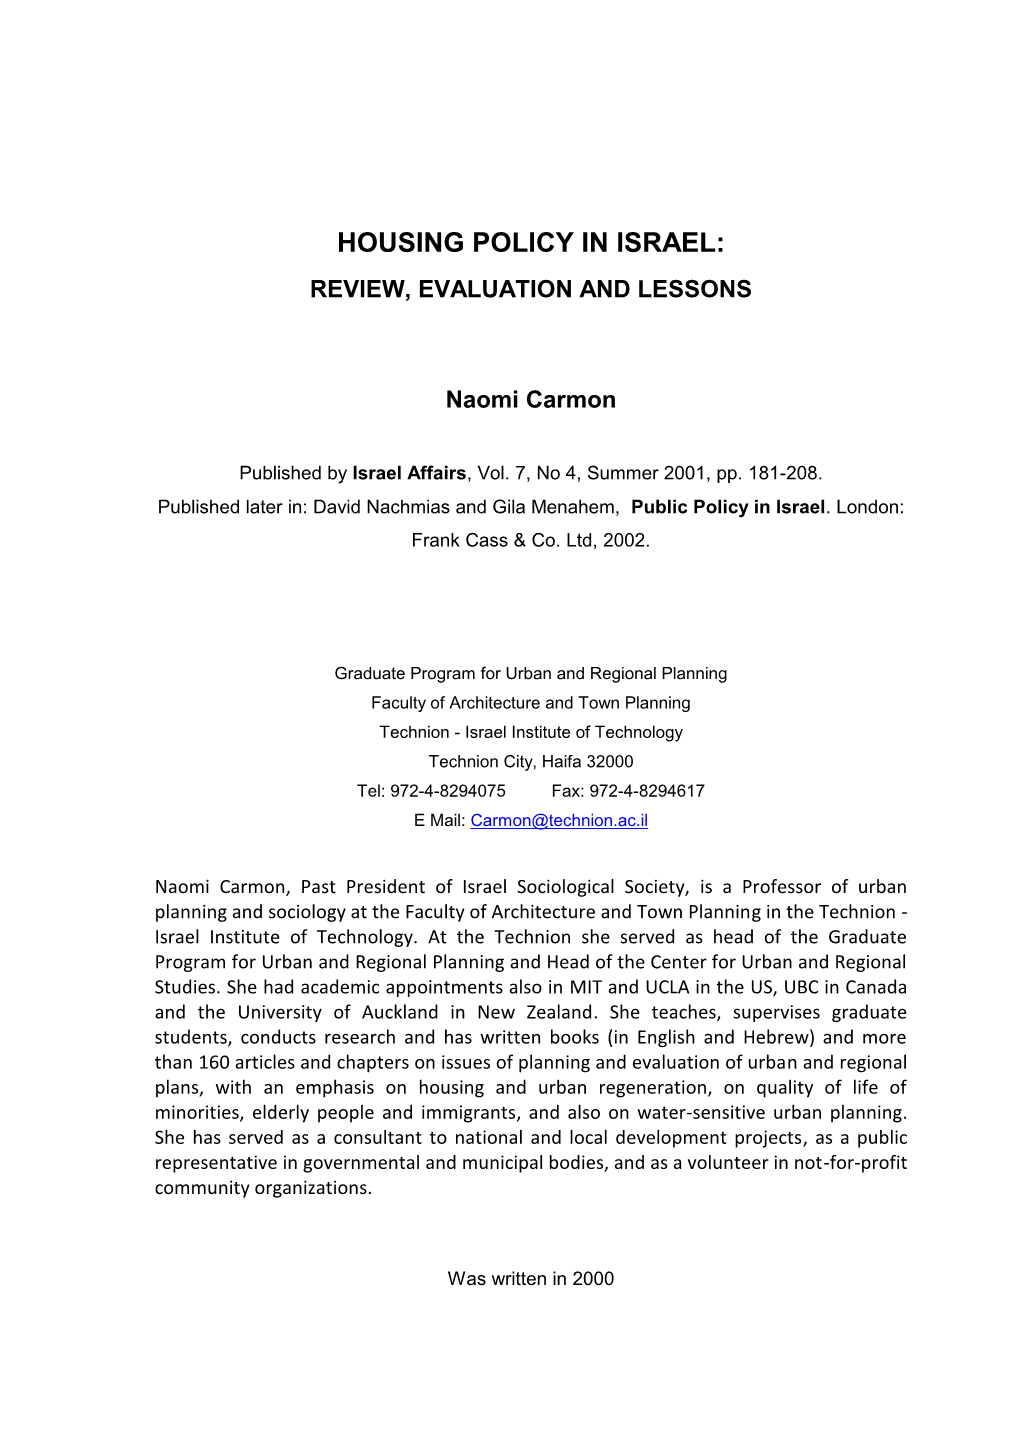 Housing Policy in Israel: Review, Evaluation and Lessons